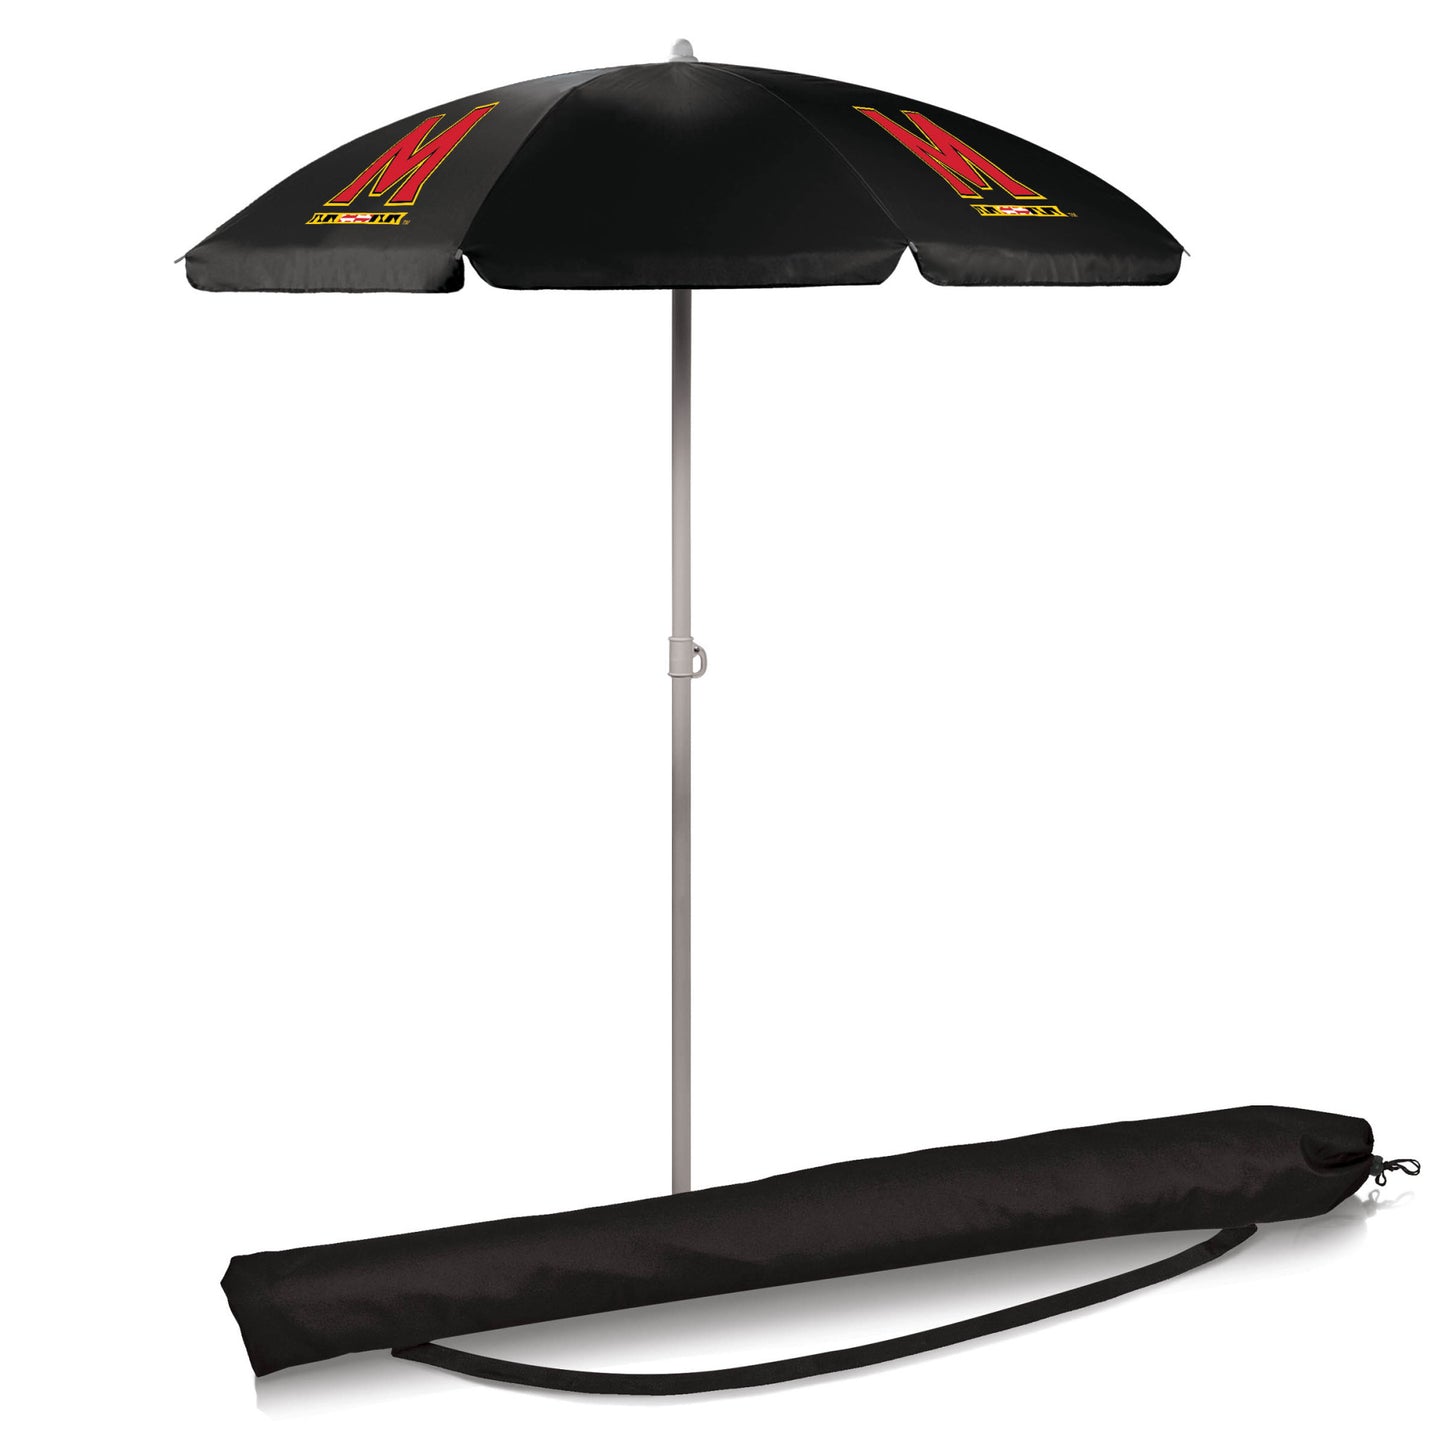 Maryland Terrapins 5.5' Portable Beach Umbrella by Picnic Time